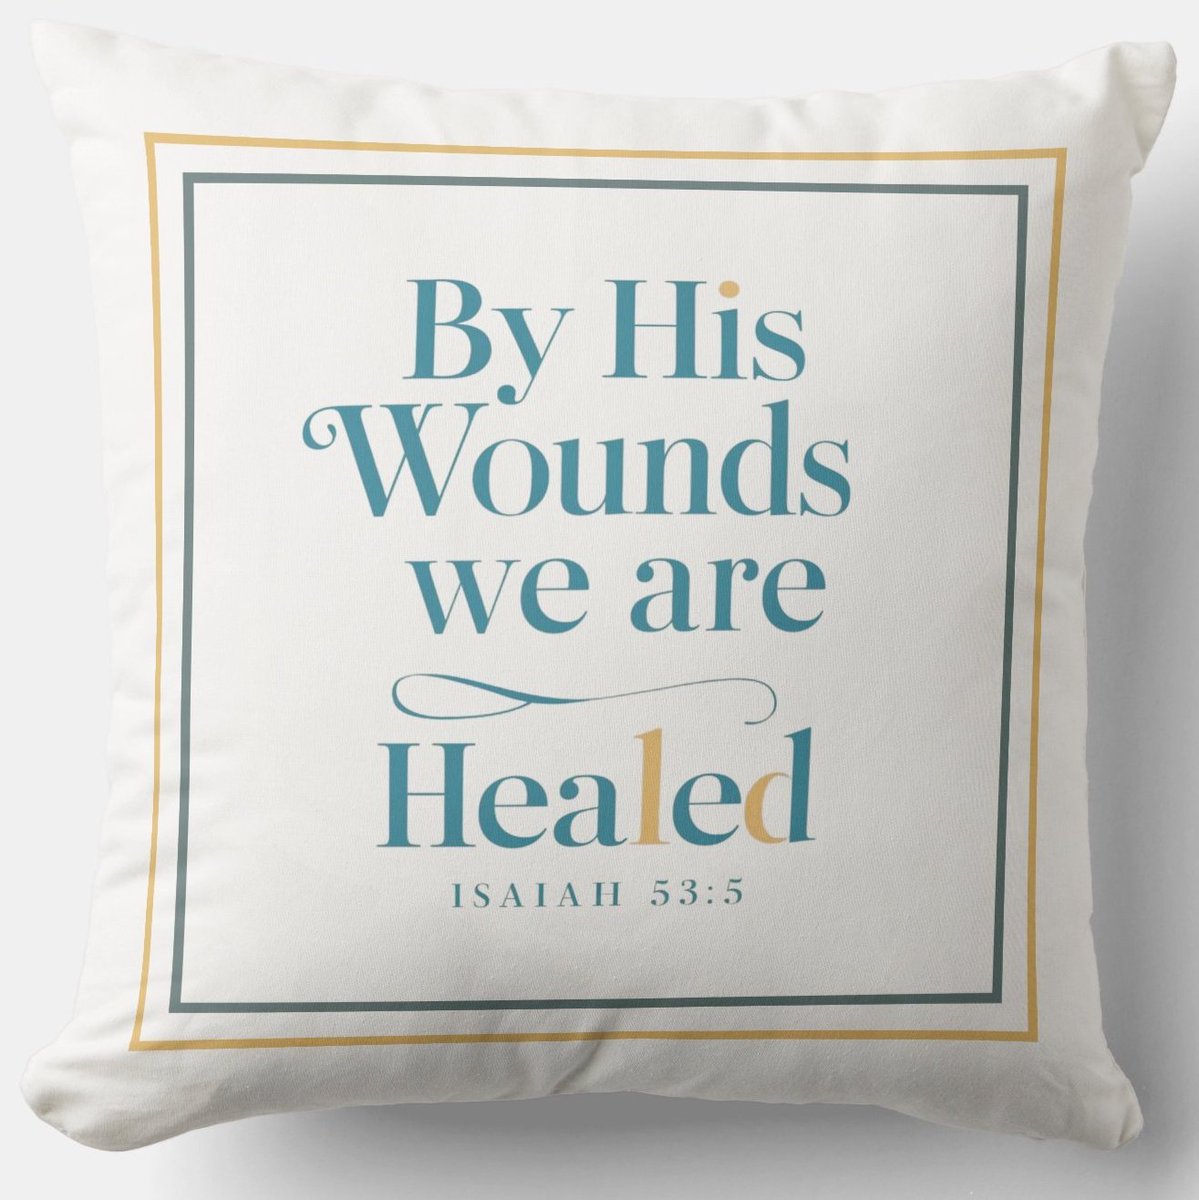 By His Wounds We Are Healed #Cushion zazzle.com/by_his_wounds_… Isaiah 53:5 #Pillow #Blessing #JesusChrist #JesusSaves #Jesus #christian #spiritual #Homedecoration #uniquegift #giftideas #MothersDayGifts #giftformom #giftidea #HolySpirit #pillows #giftshop #giftsforher #giftsformom